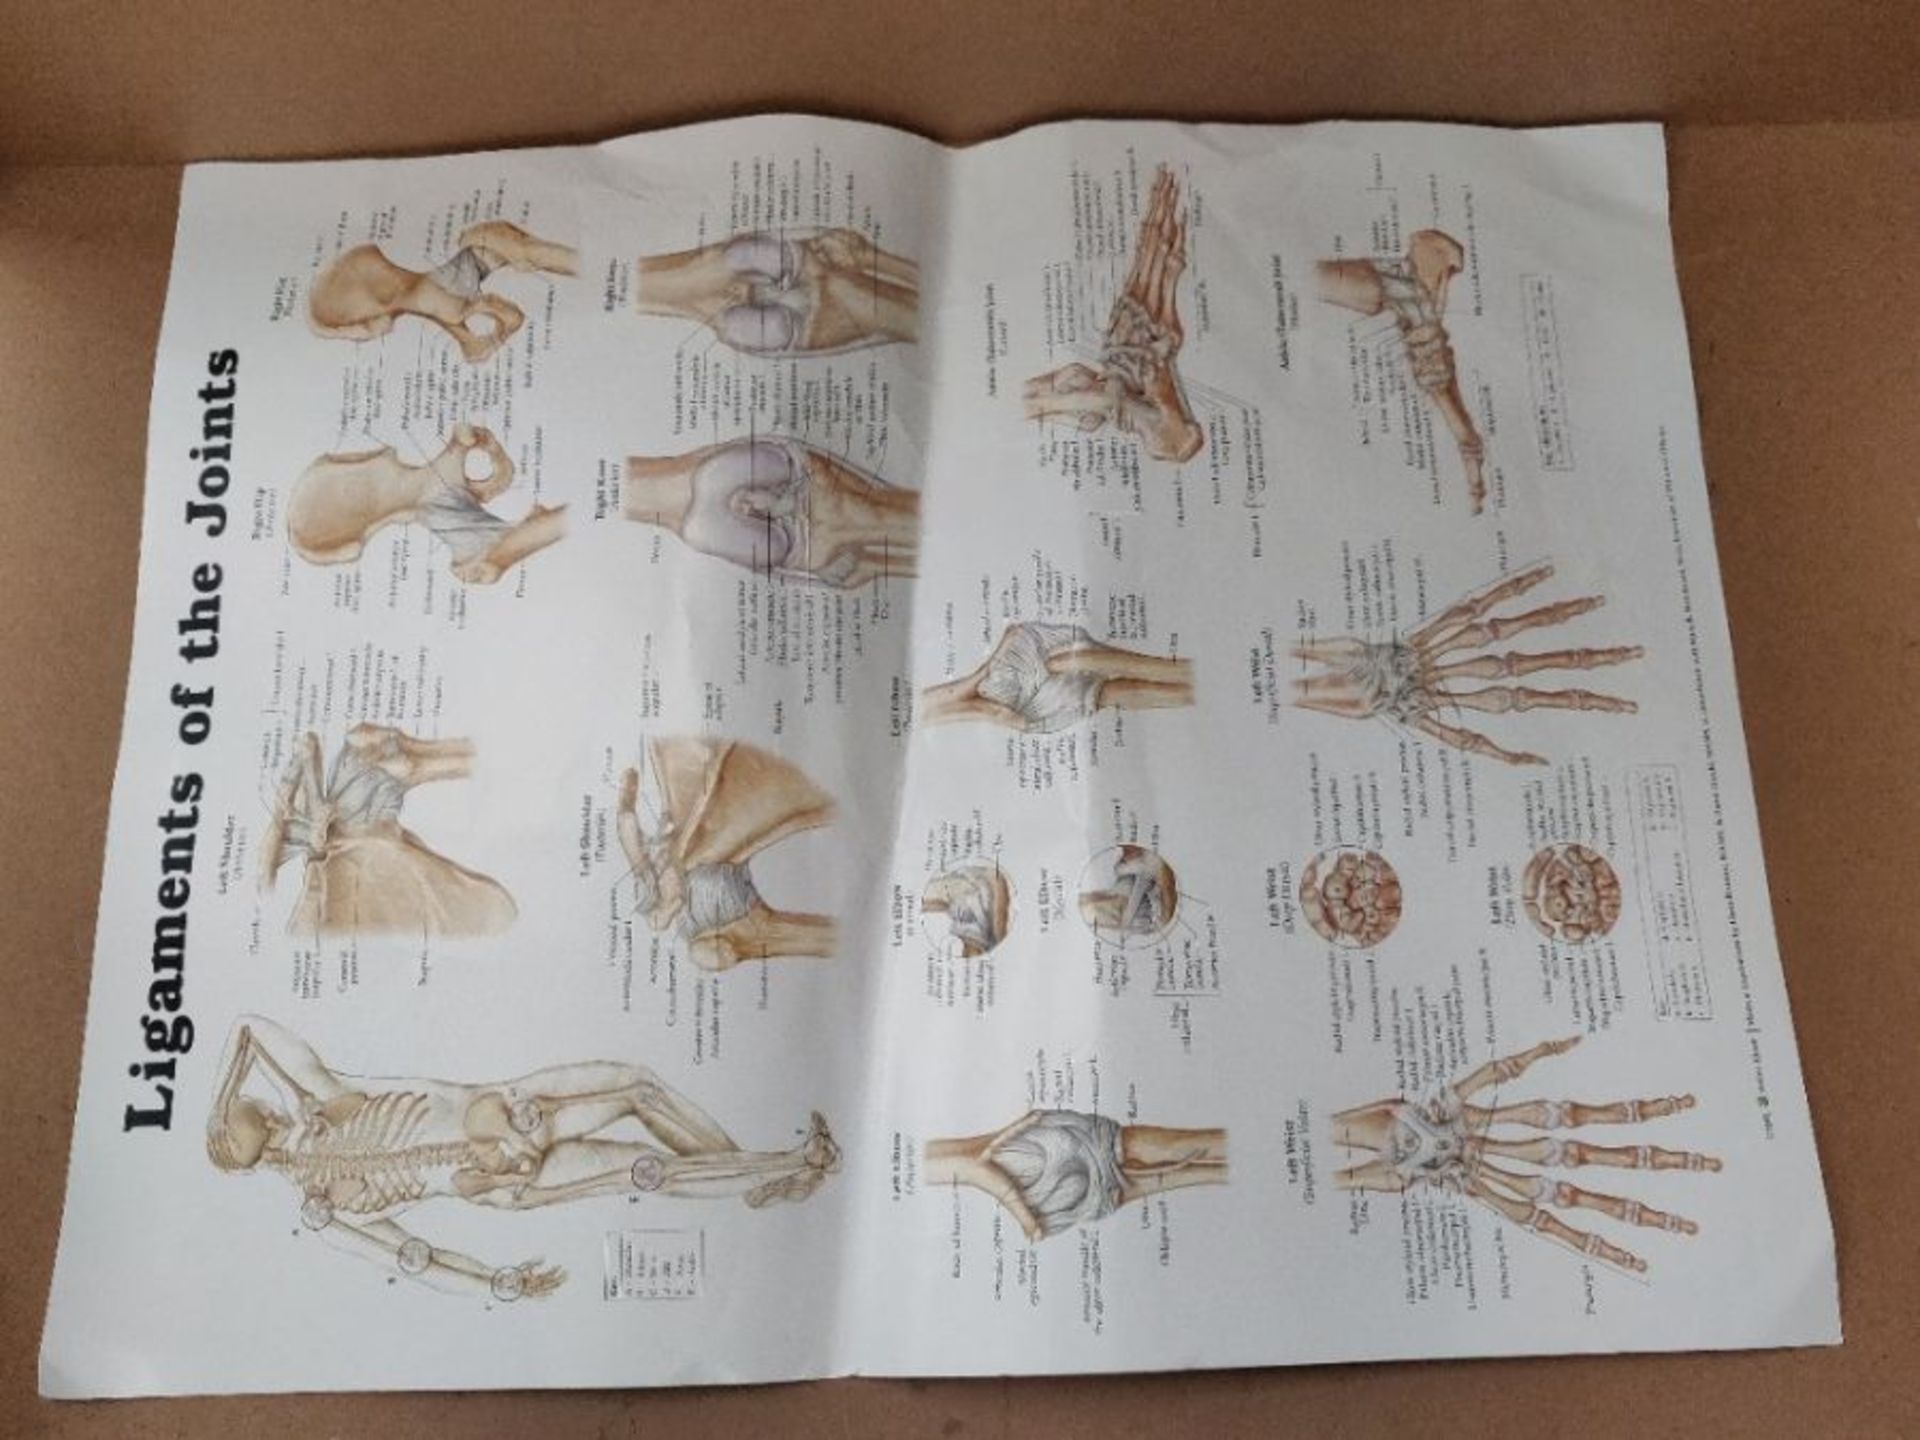 Anatomical Chart Ligaments of the Joints - Image 2 of 2